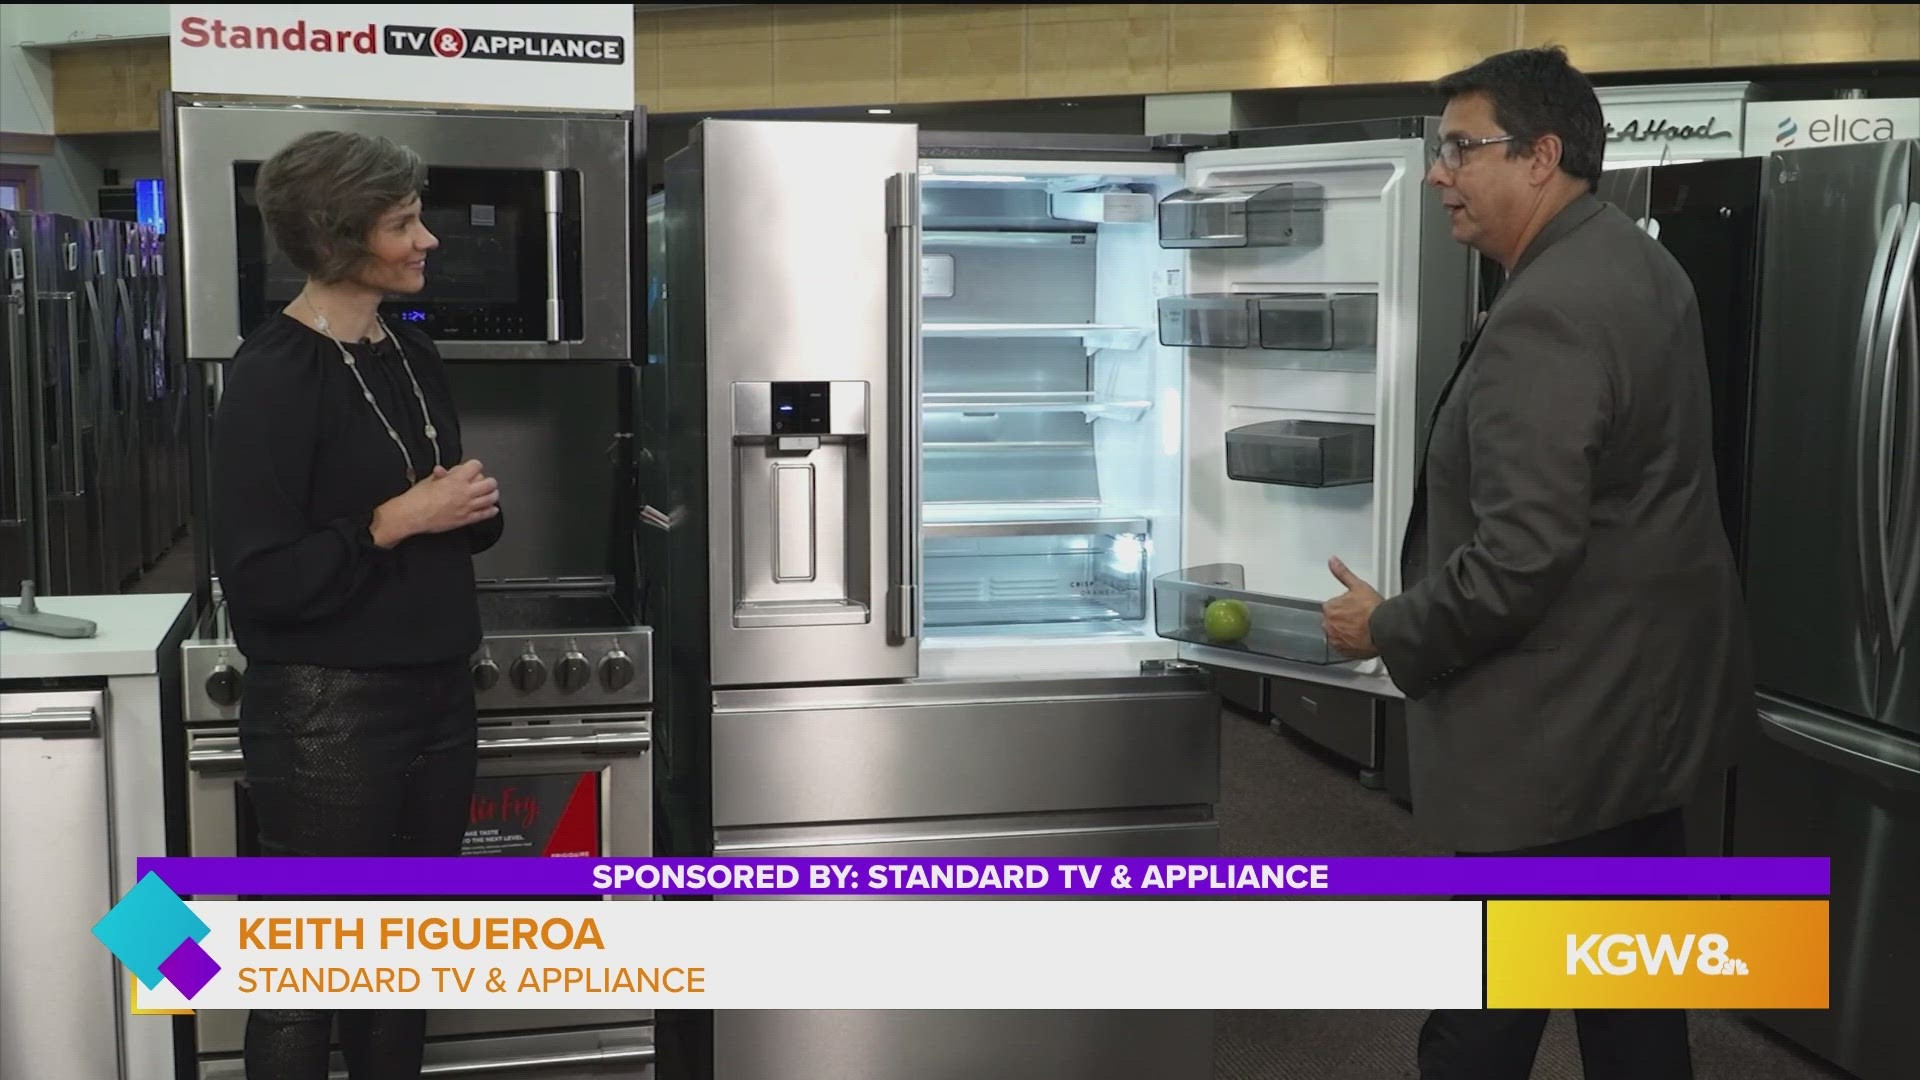 This segment is sponsored by Standard TV & Appliance